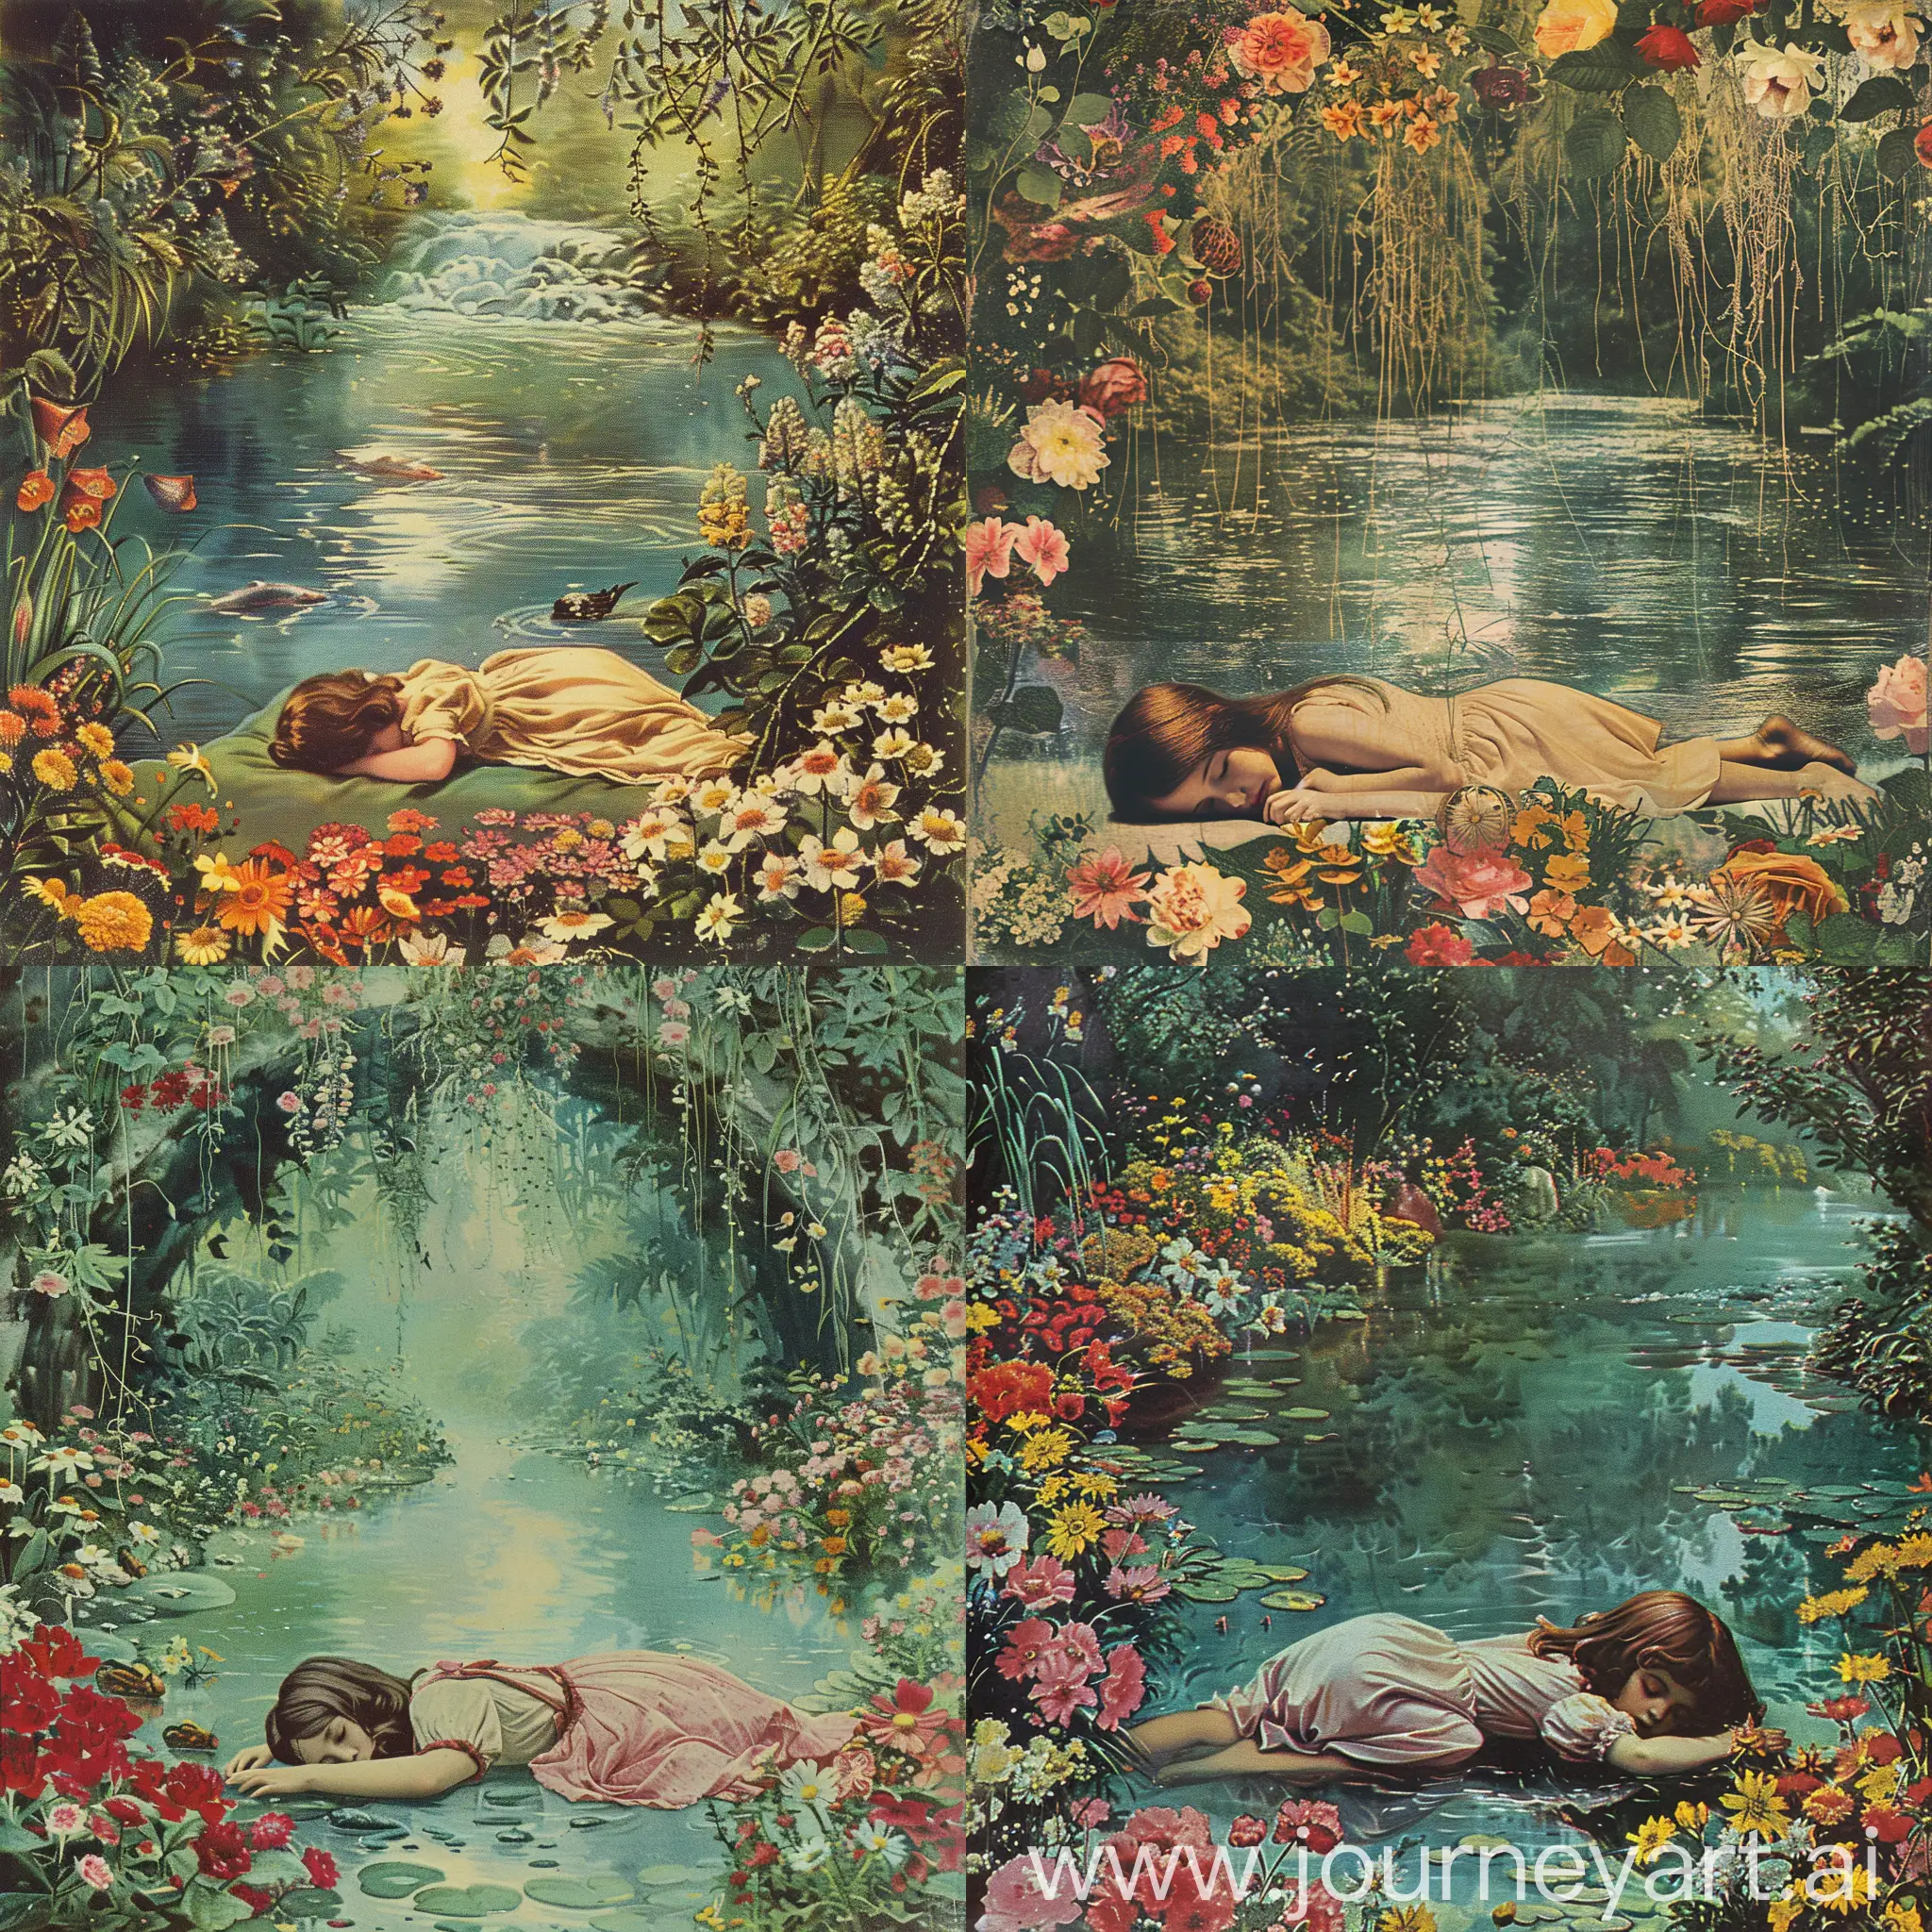 A girl sleeping under the river which is full of flowers and garden vintage